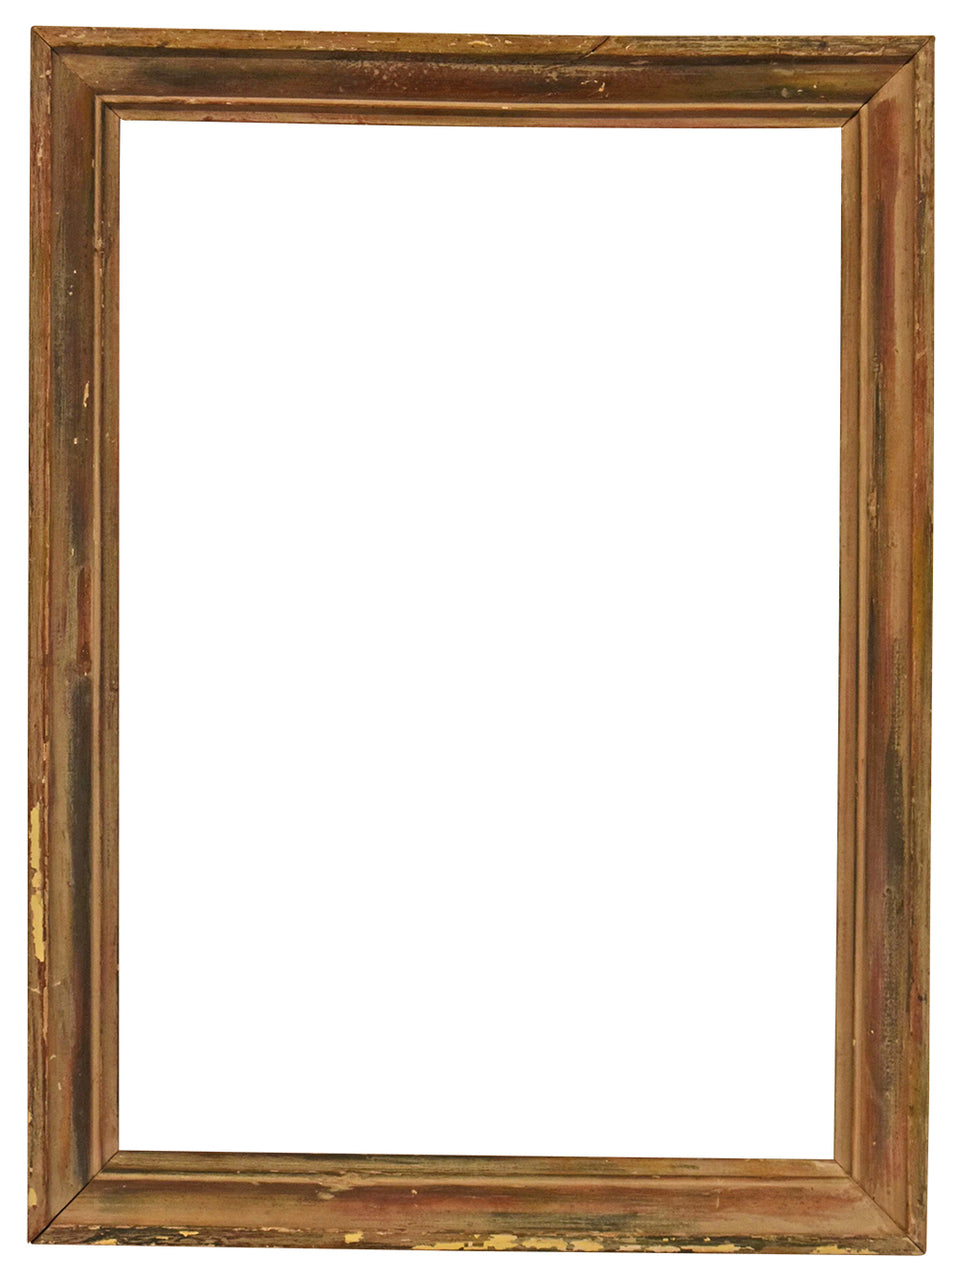 American 18x26 inch Wooden Antique Picture Frame for canvas art.